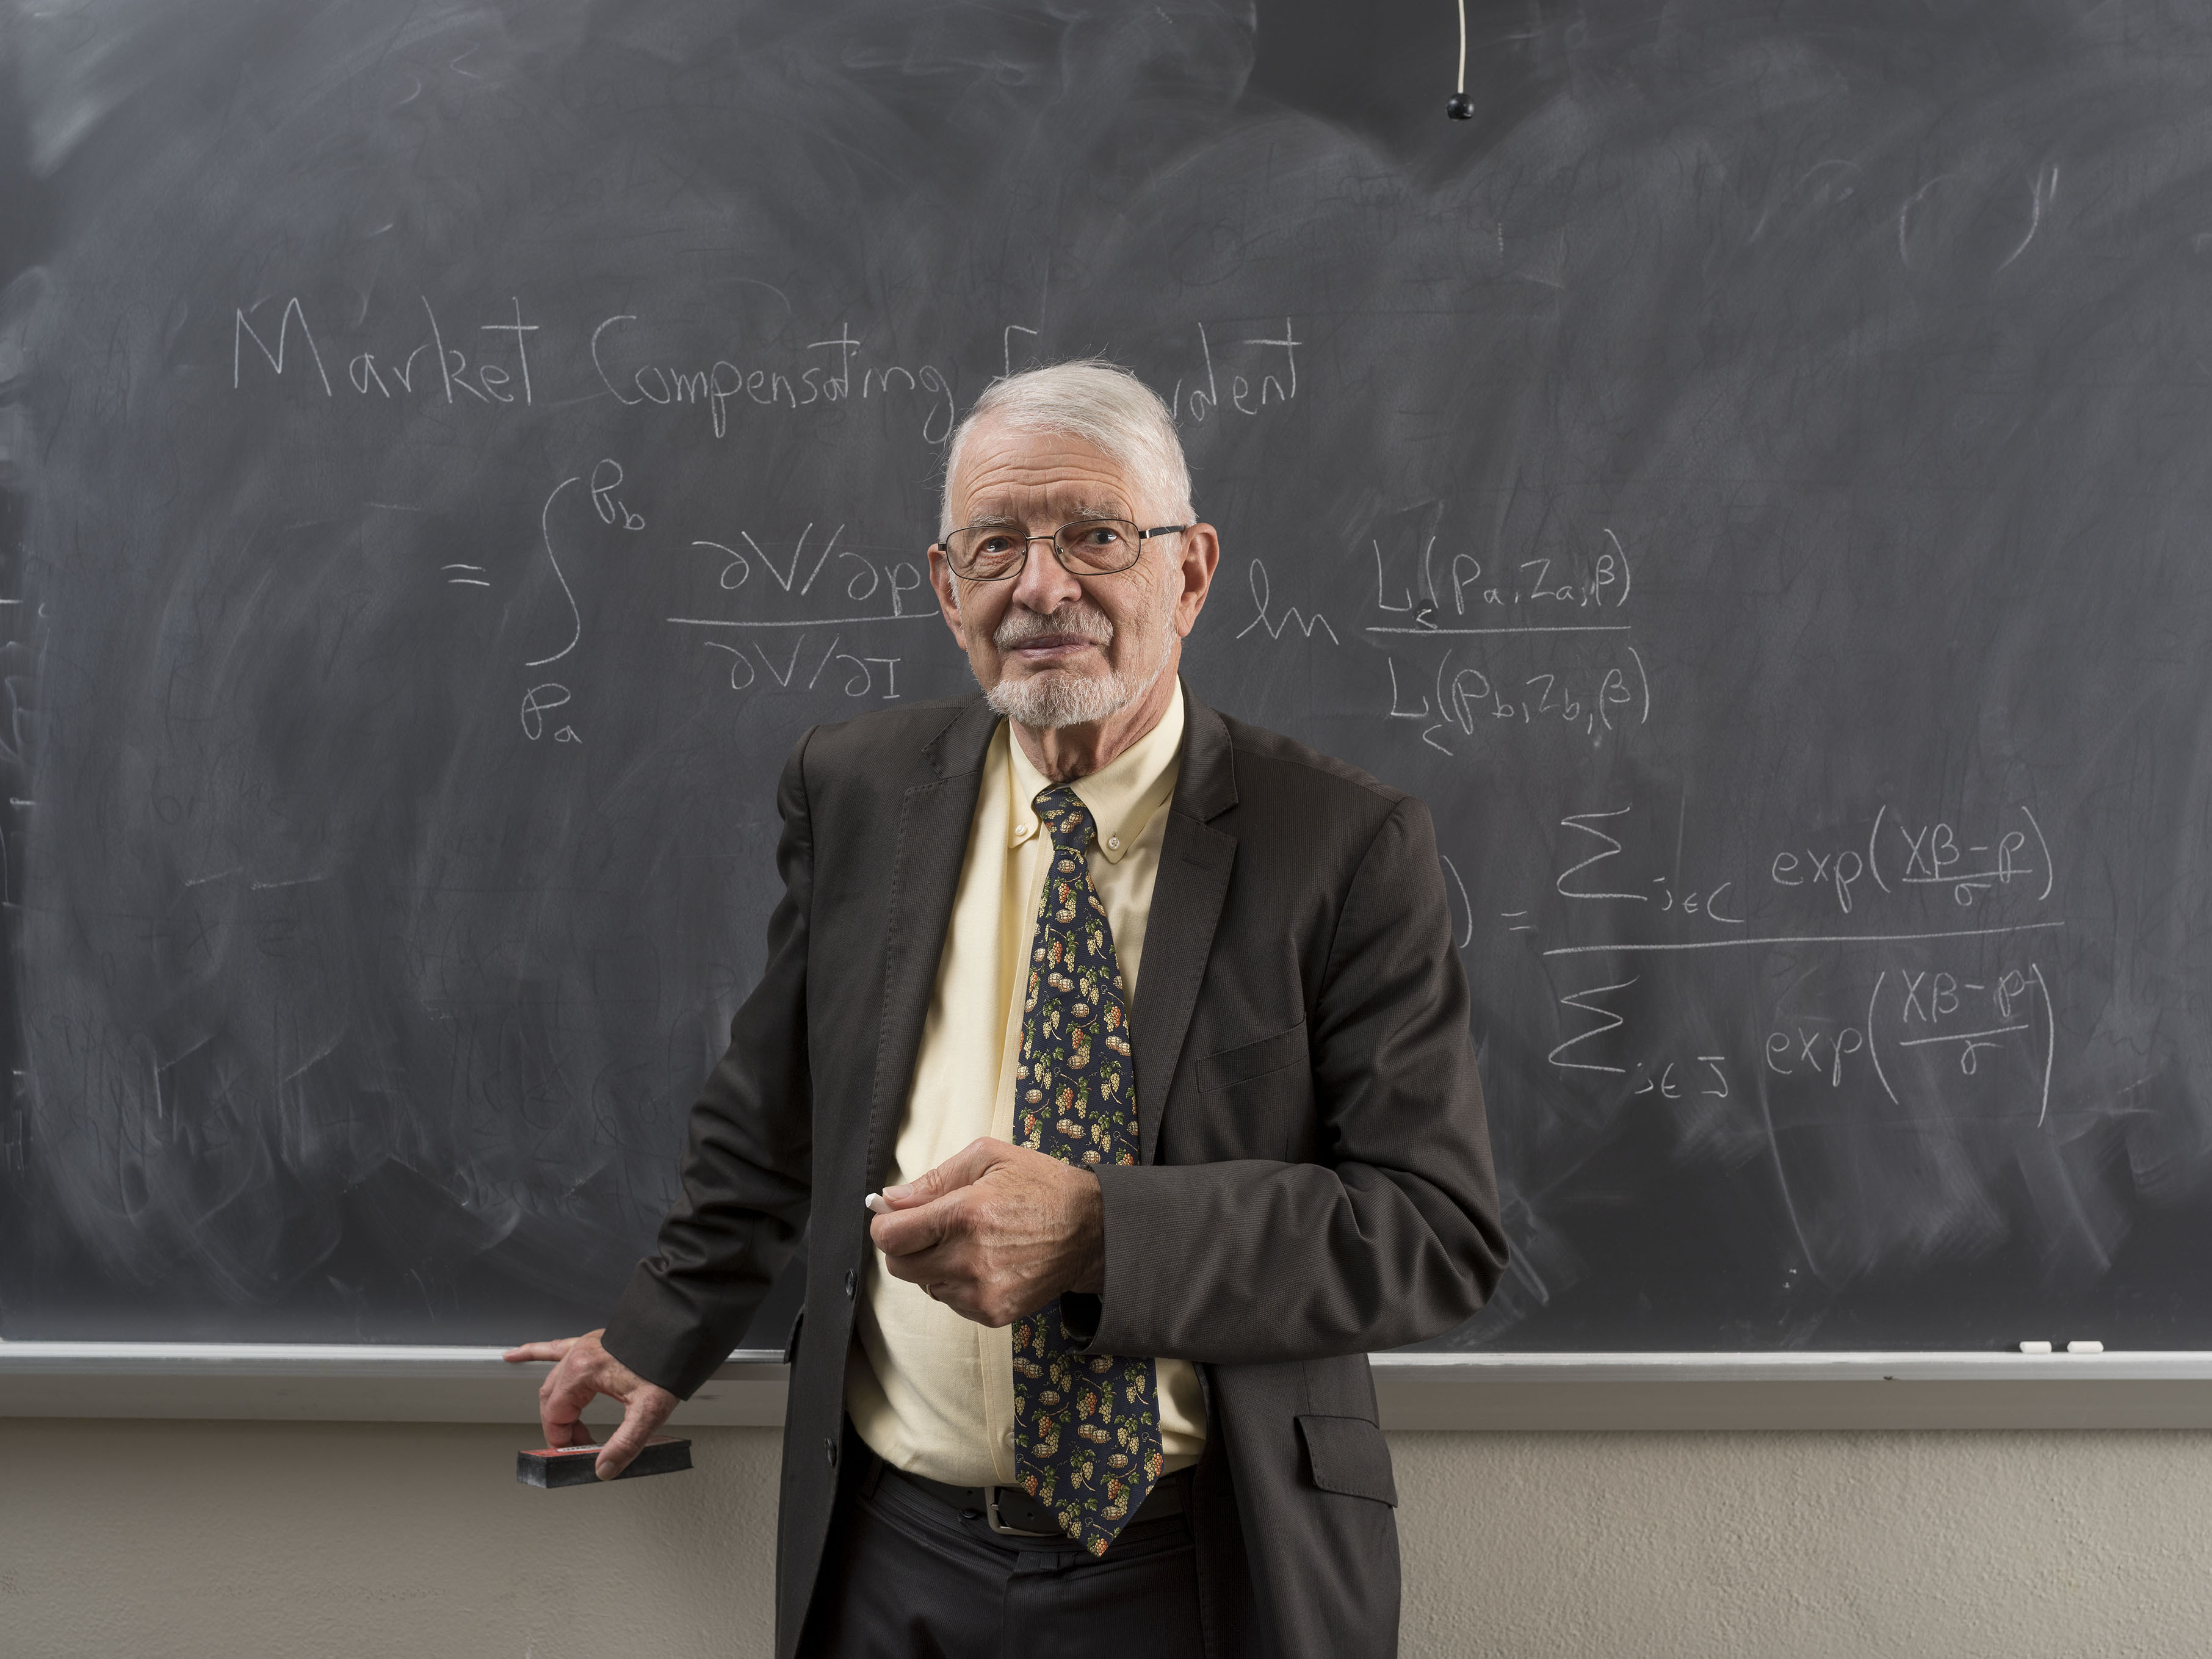 Daniel McFadden standing in front of a chalk board with an equation written on it.